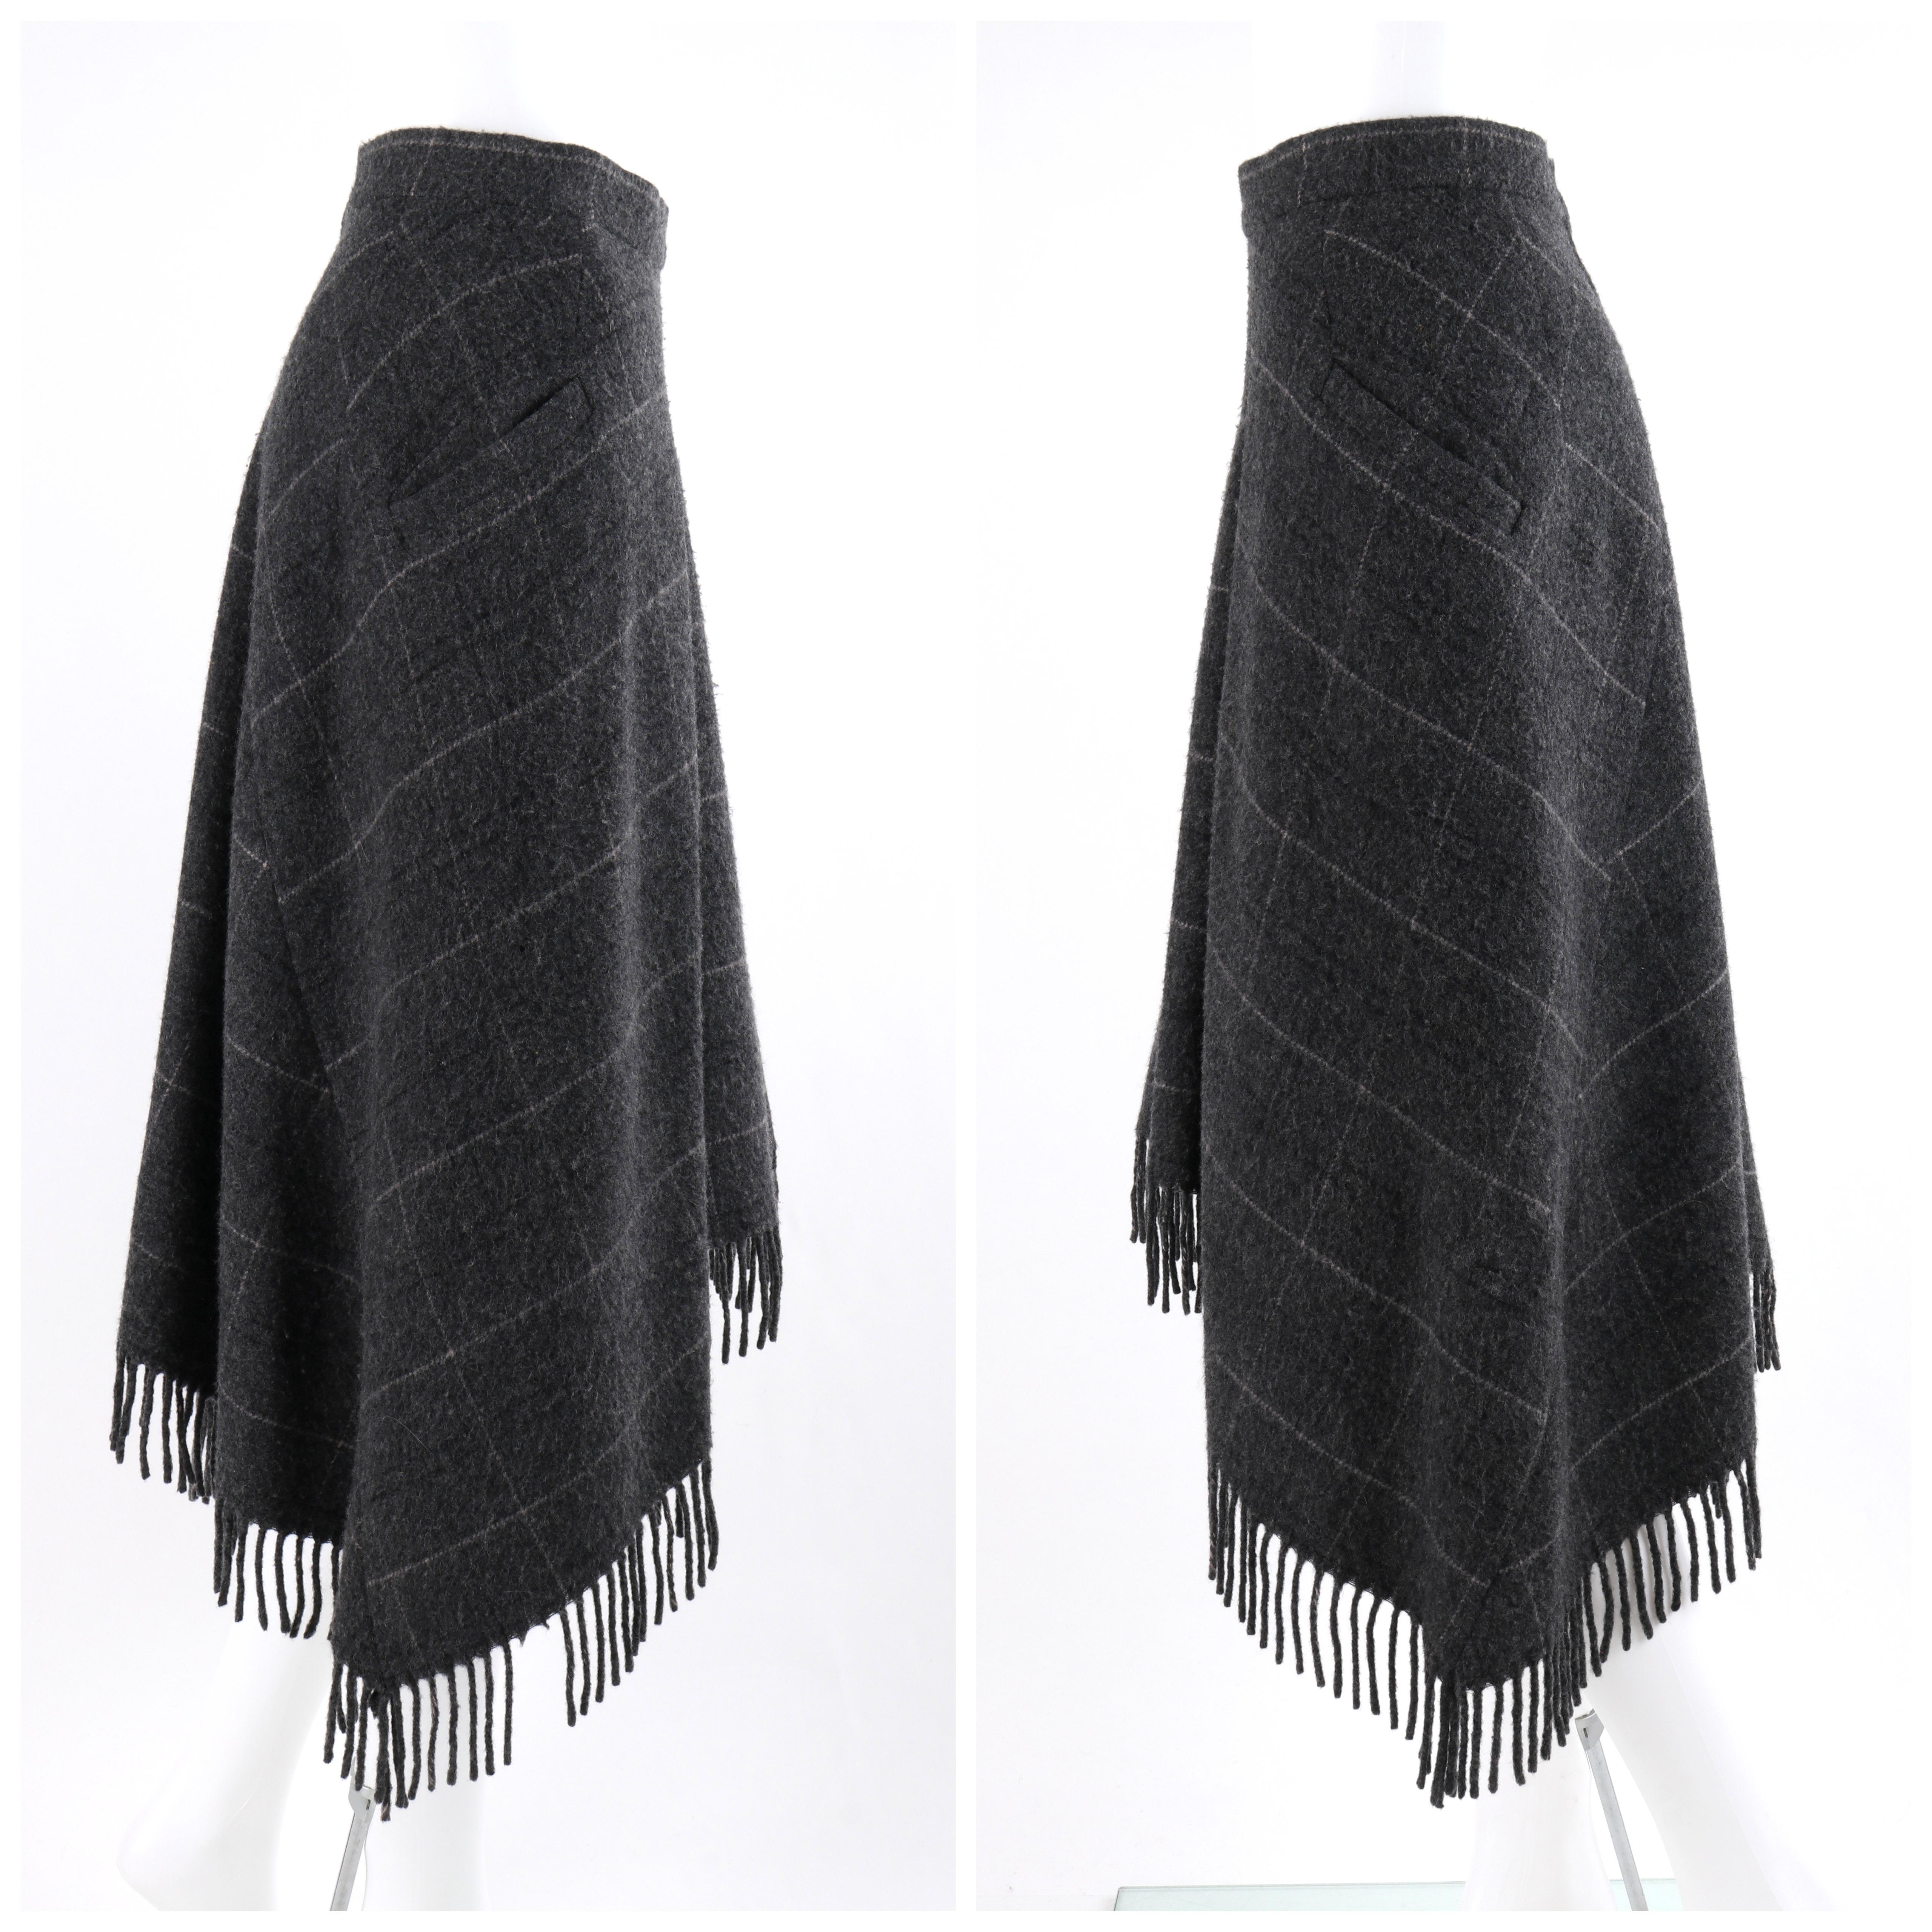 ALEXANDER McQUEEN A/W 1999 “The Overlook” Gray Check Fringe Jacket Skirt Set For Sale 1